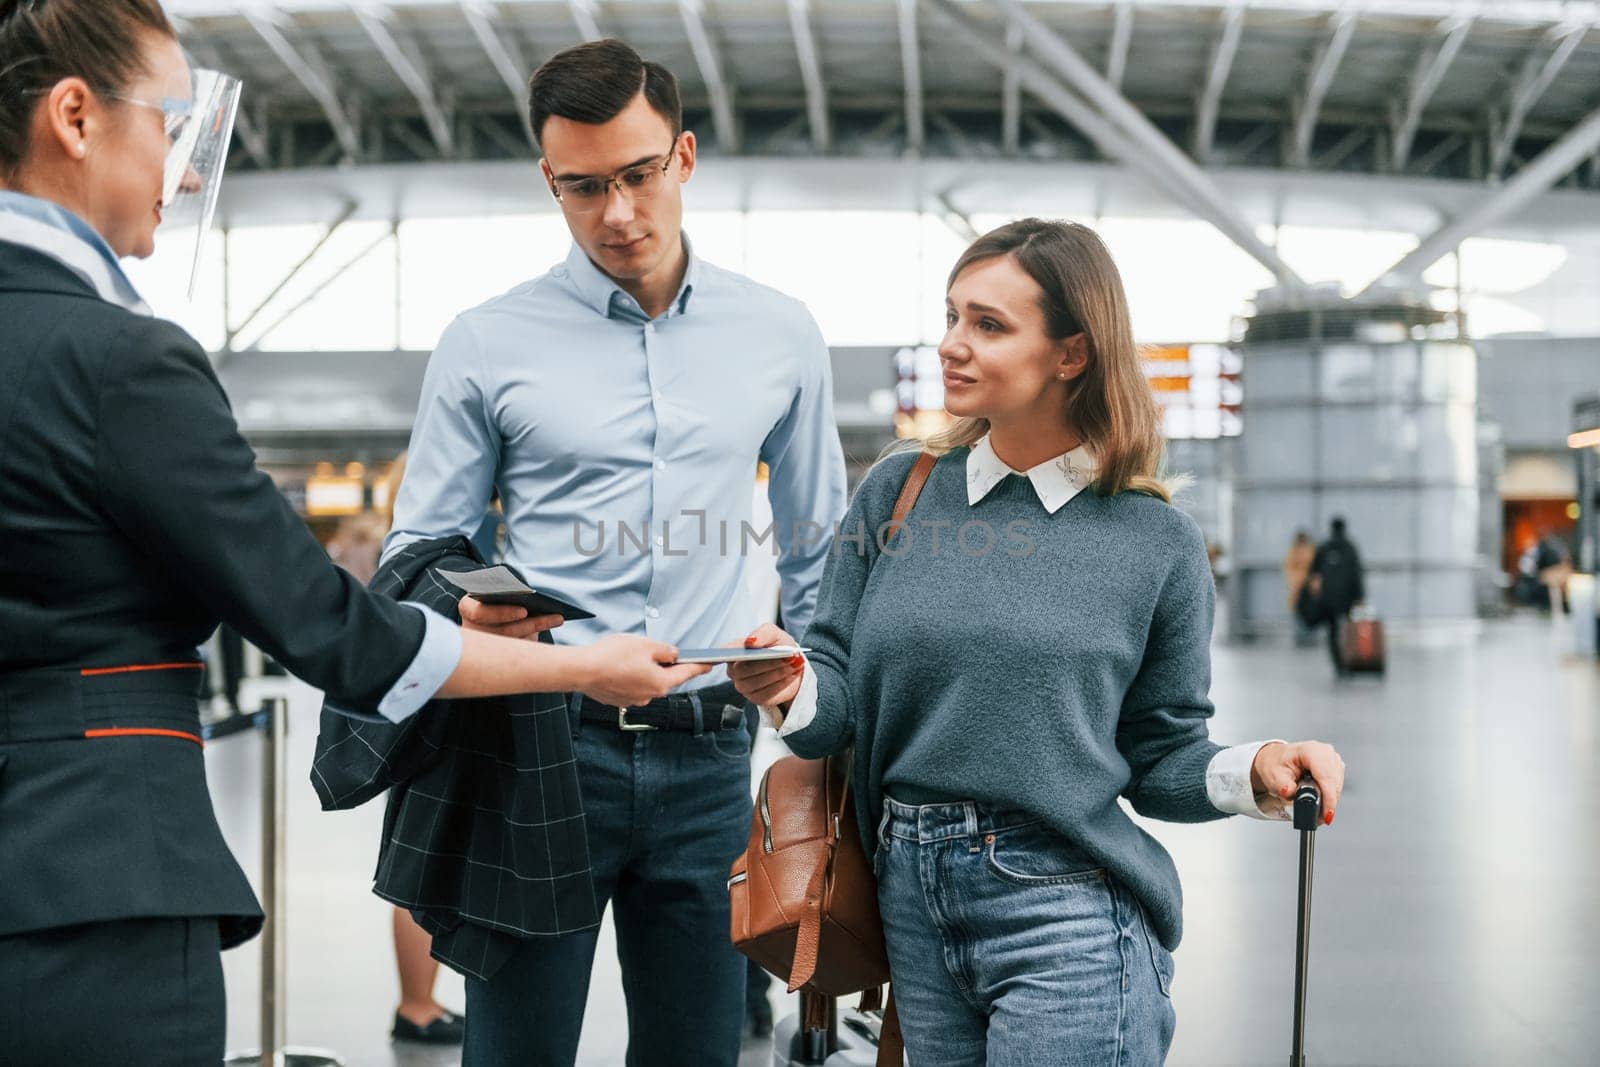 Checking documents at the entrance. Young couple is in the airport together.